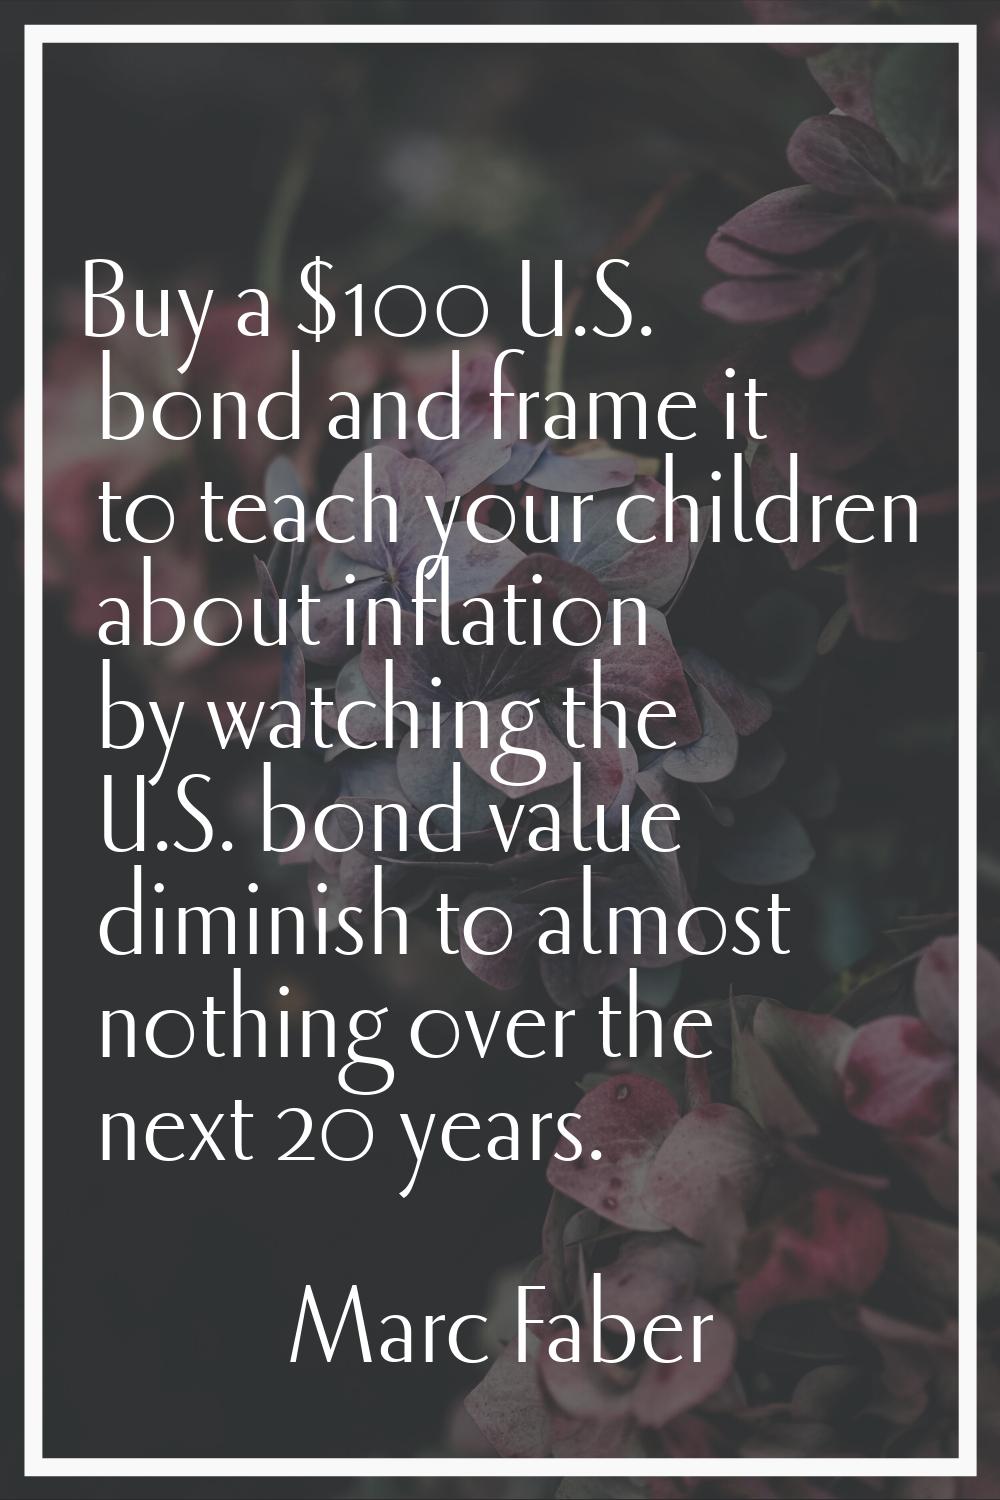 Buy a $100 U.S. bond and frame it to teach your children about inflation by watching the U.S. bond 